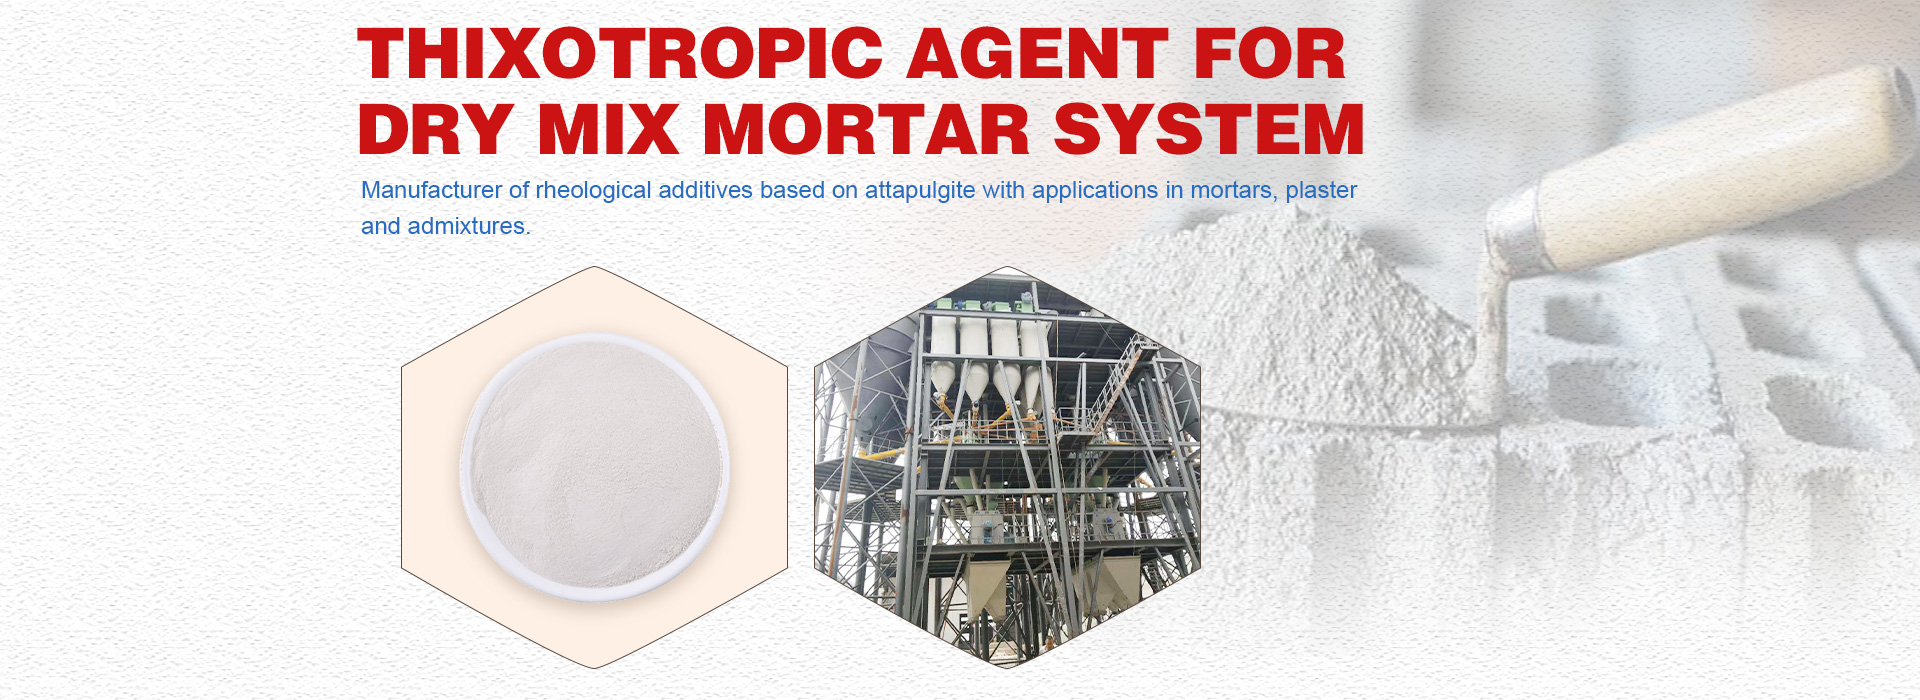 Raw material construction suspension agent for eps cement mix use paint machine for dry mortar production line